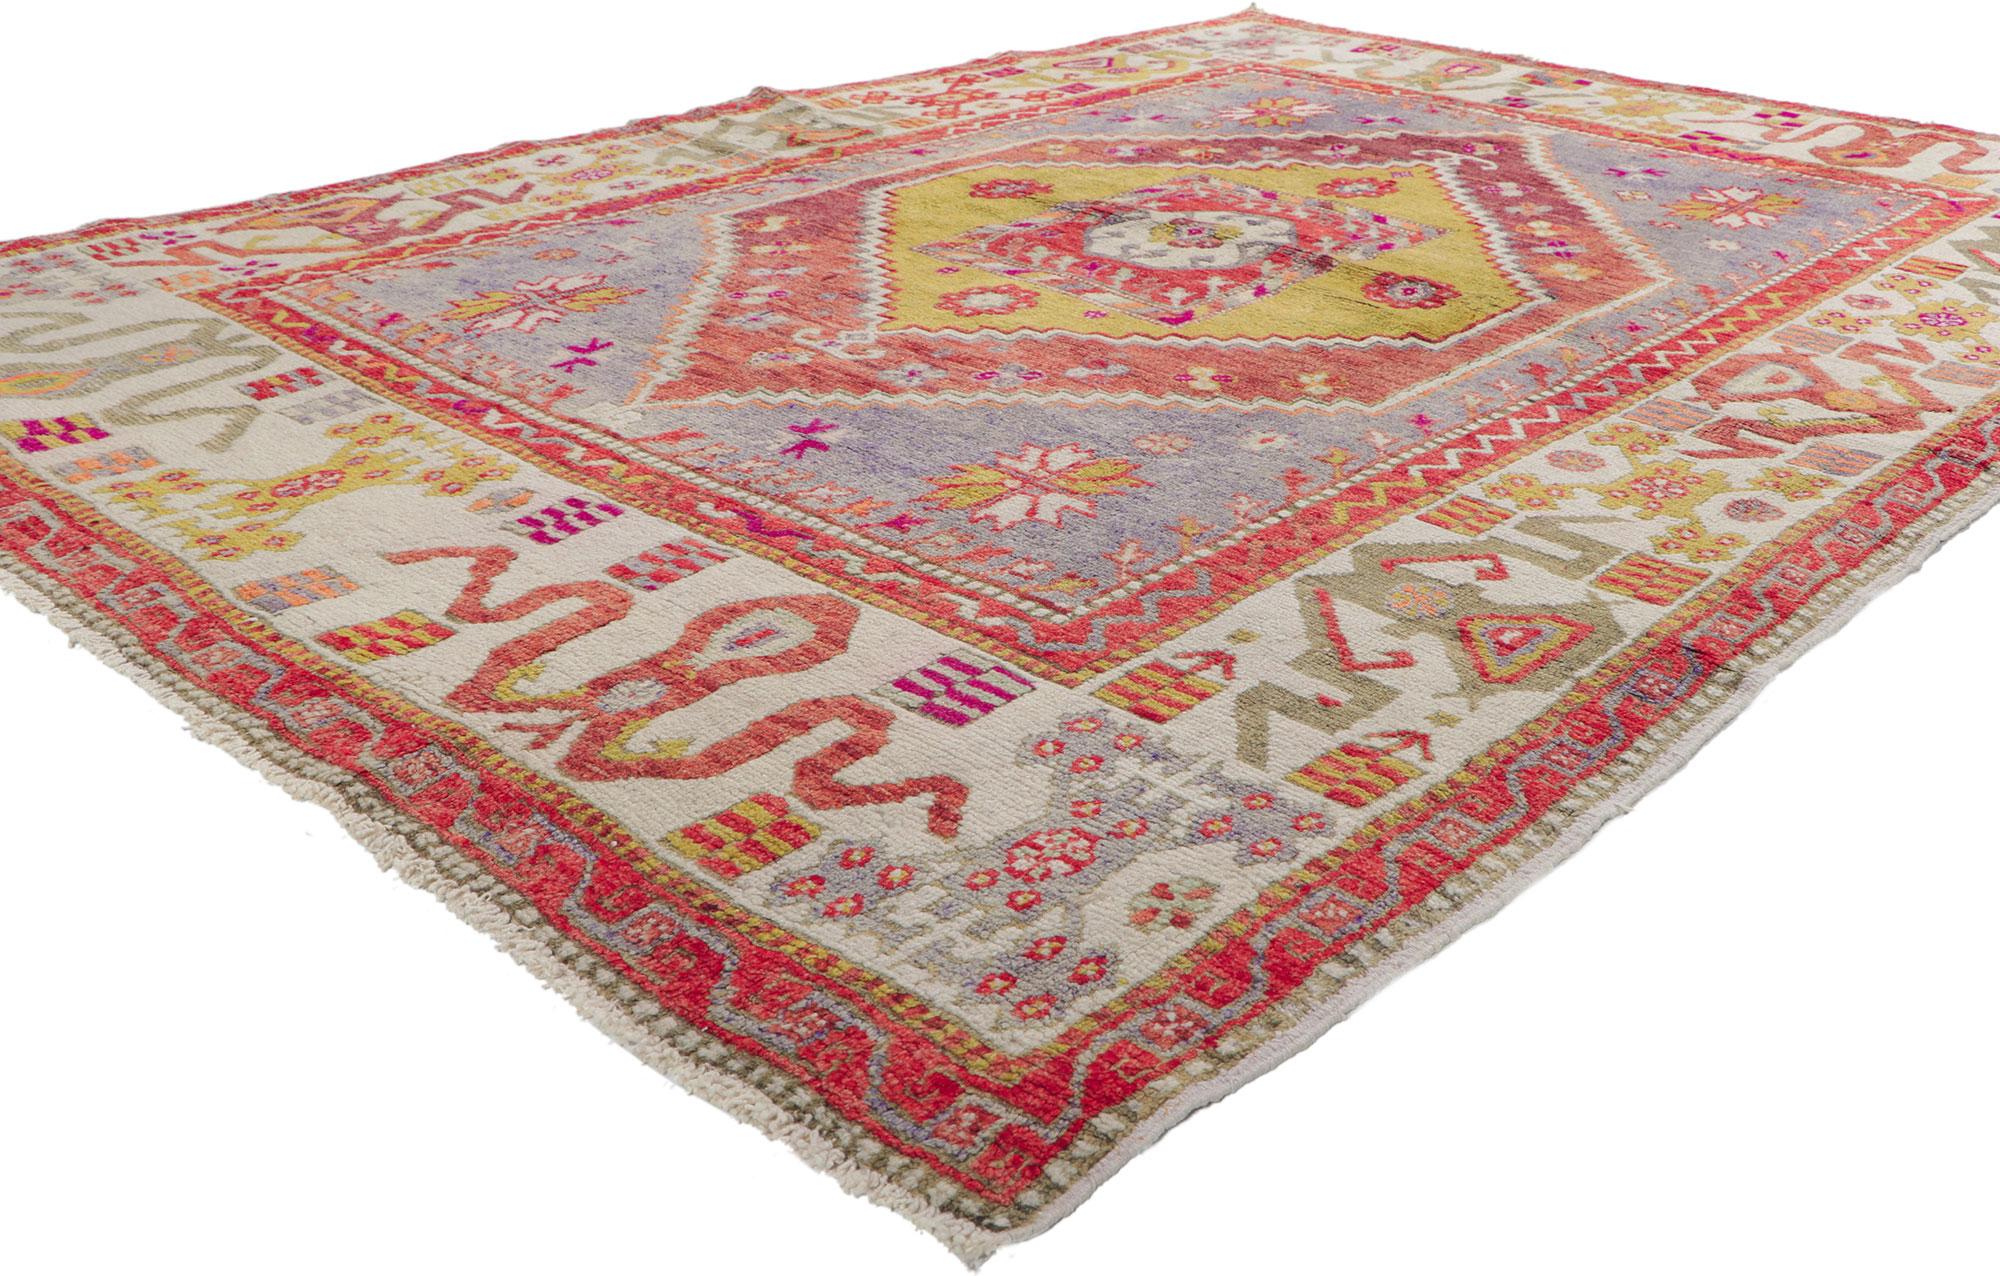 51782 Vintage Turkish Oushak Rug, 05'11 x 08'04.
Showcasing a bold expressive design, incredible detail and texture, this hand knitted wool vintage Turkish Oushak rug is a captivating vision of woven beauty. The eye-catching medallion design and